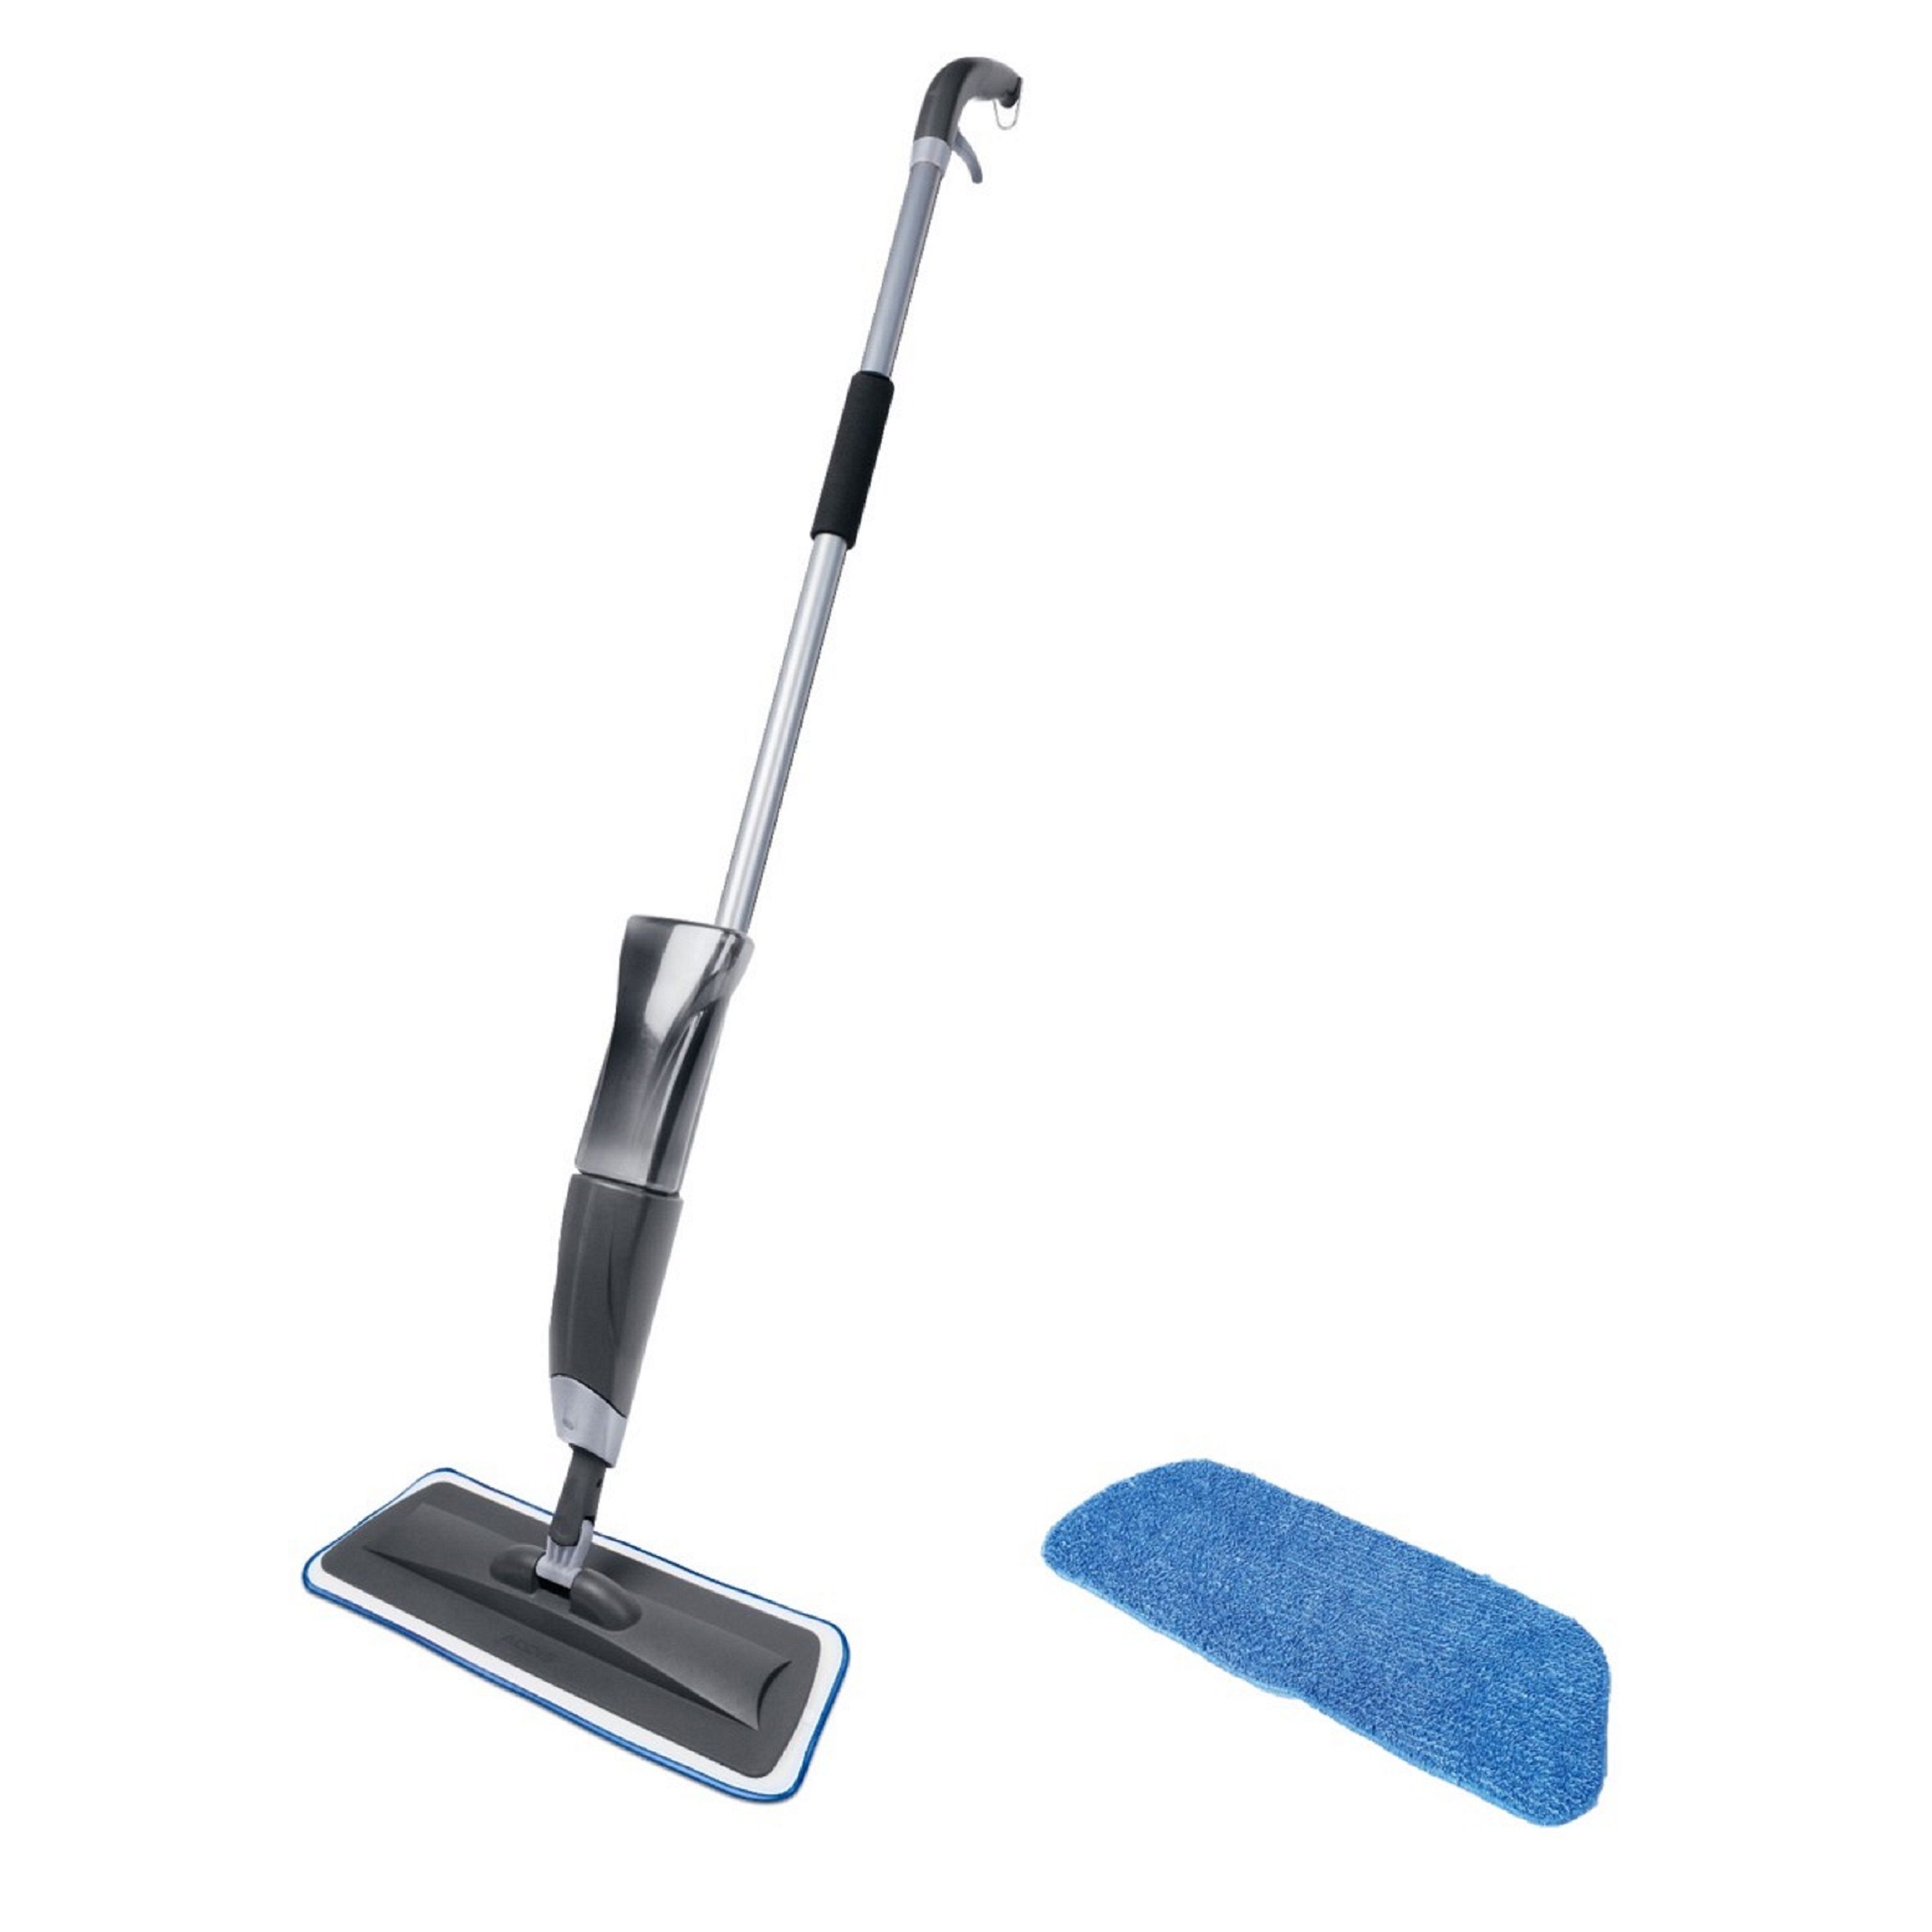 New Static Sweeper Slim & compact Lightweight With Swivel Head & Non-slip Handle 